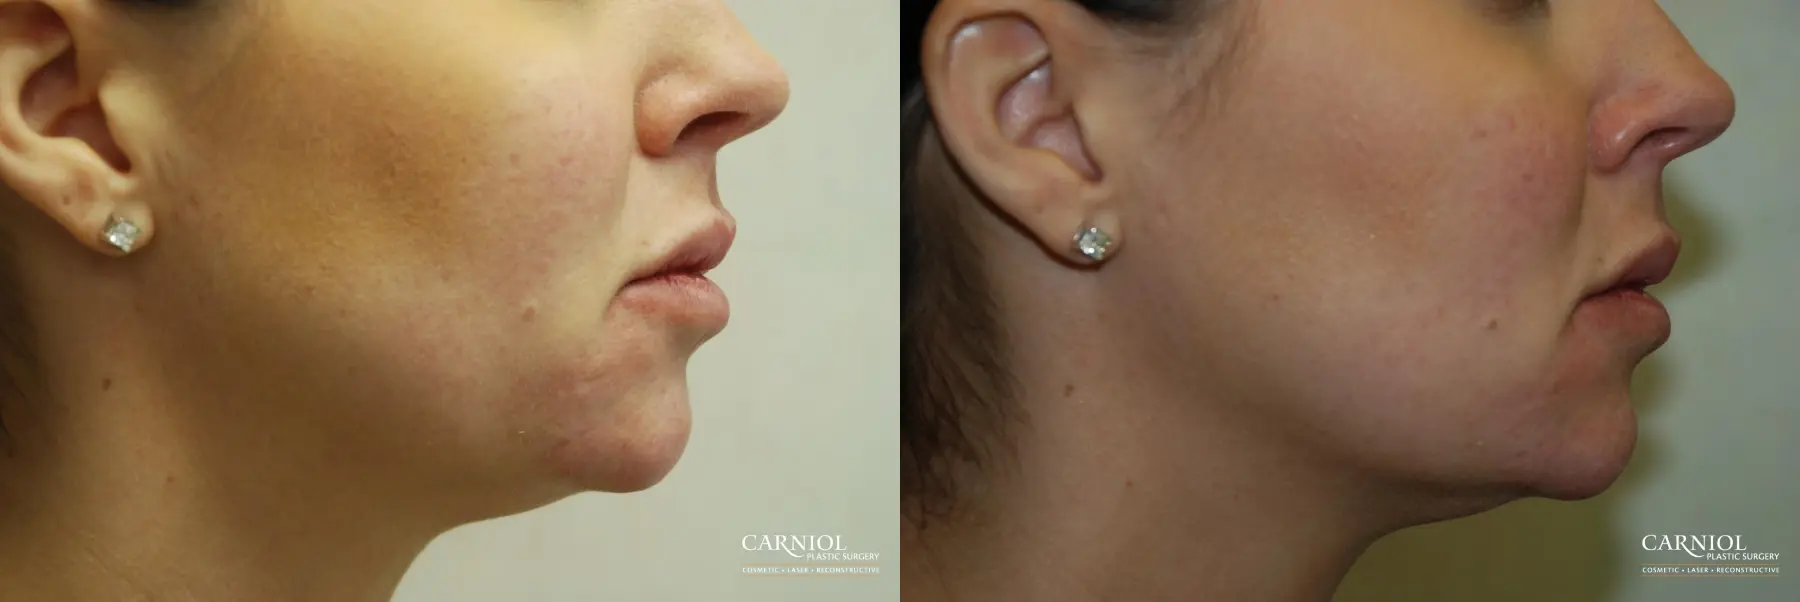 Non-Surgical Facelift: Patient 6 - Before and After 1